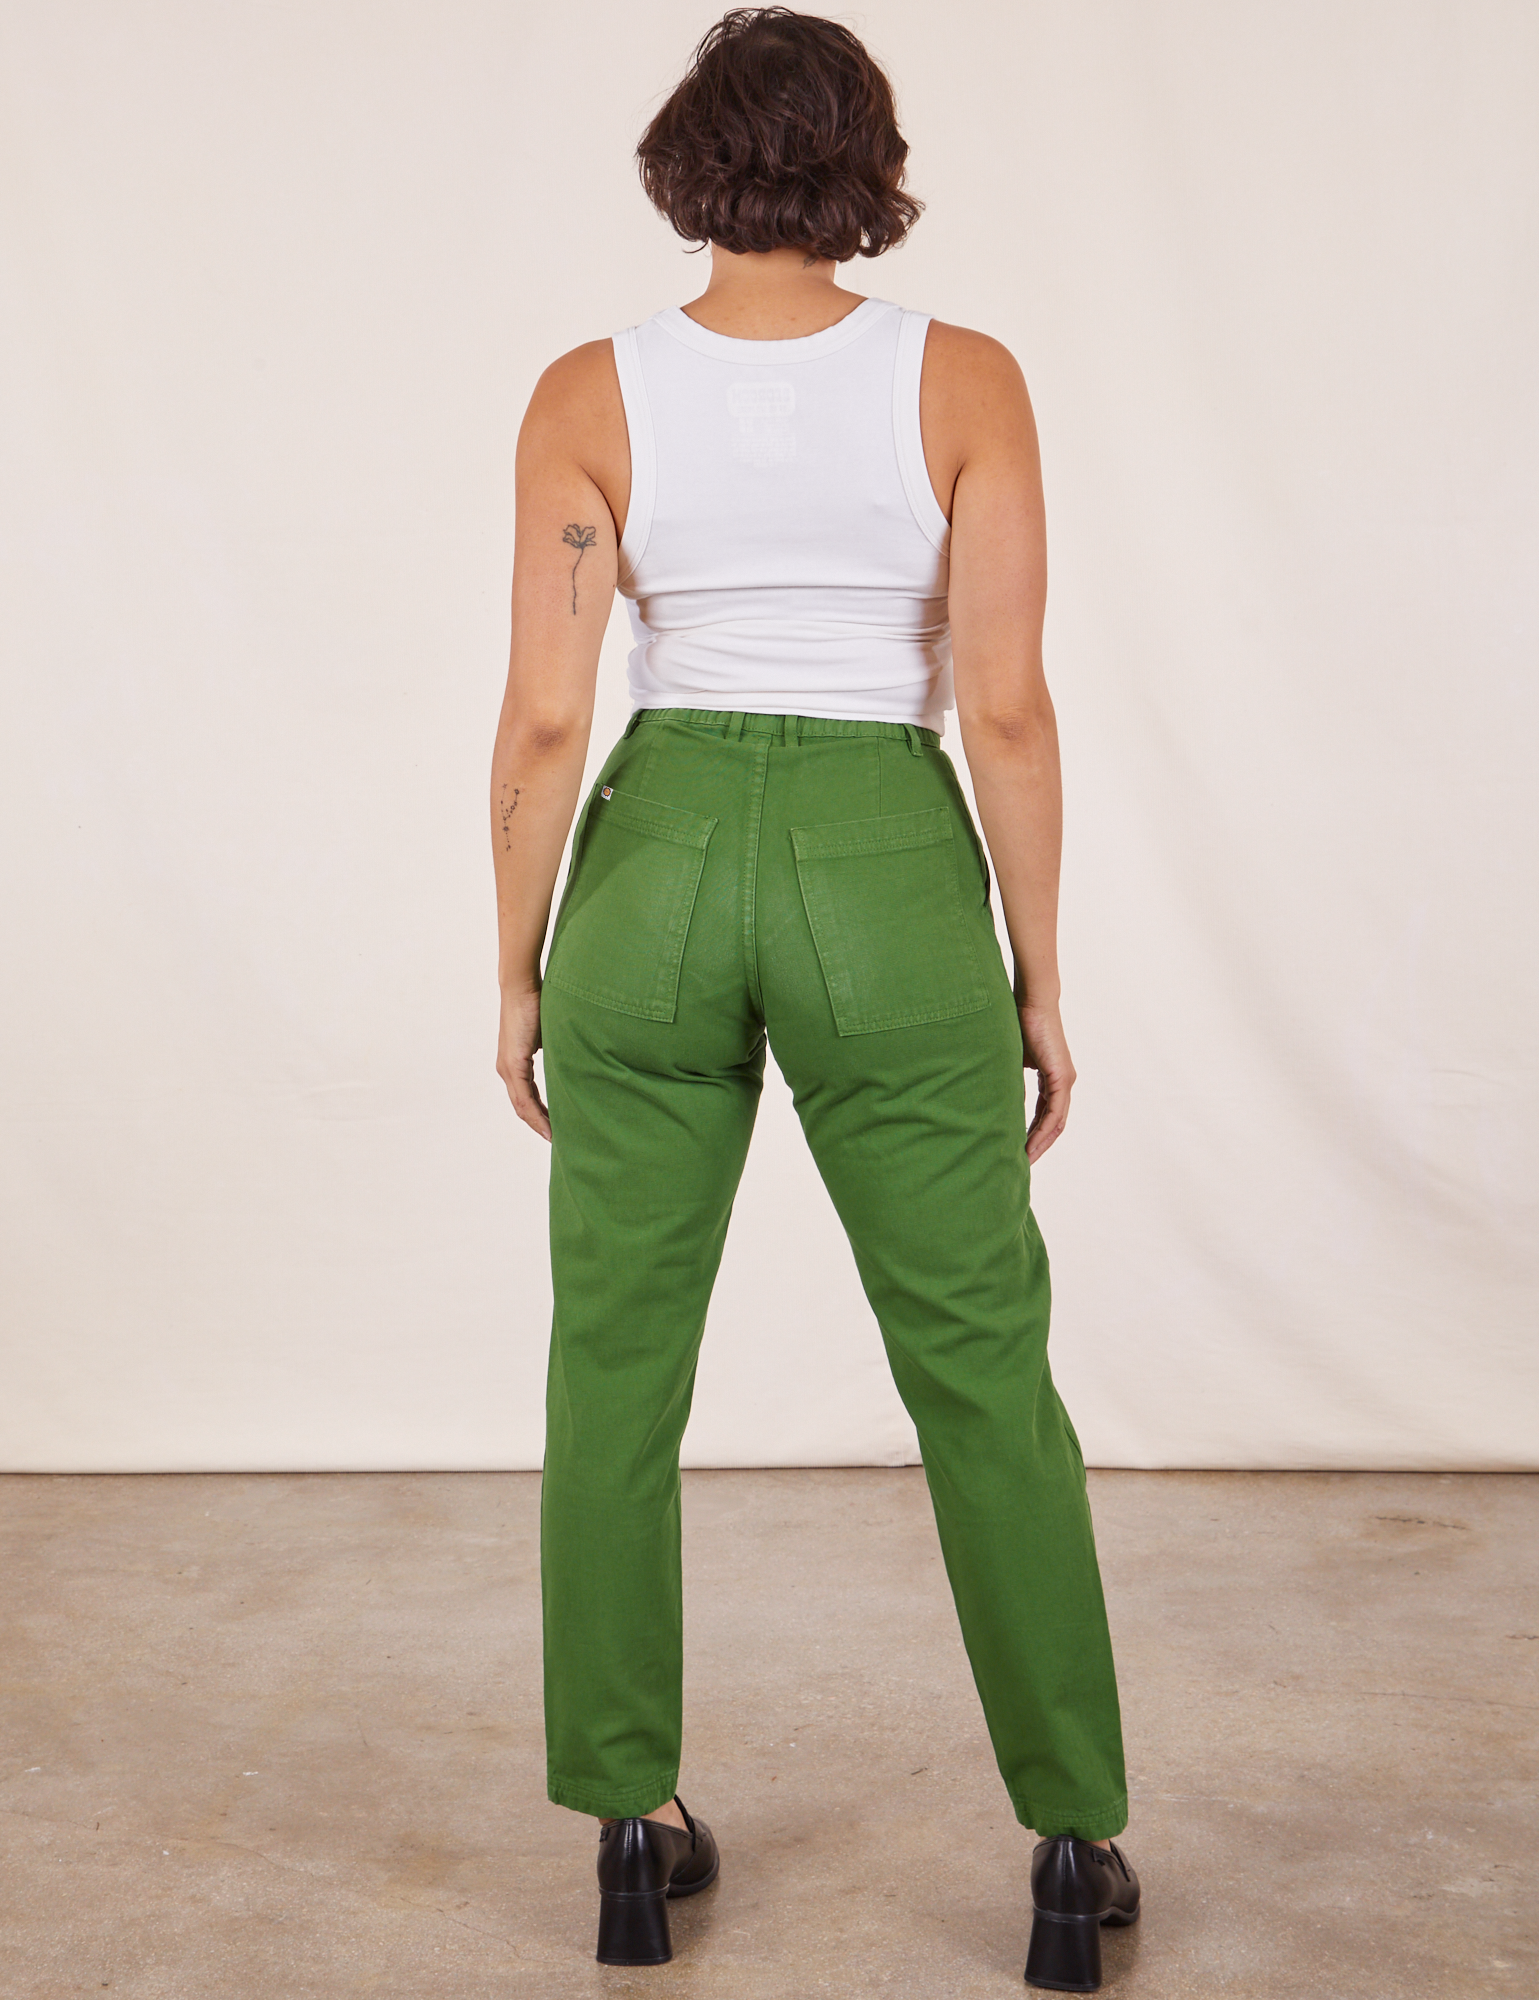 Back view of Pencil Pants in Lawn Green and vintage off-white Cropped Tank Top on Tiara